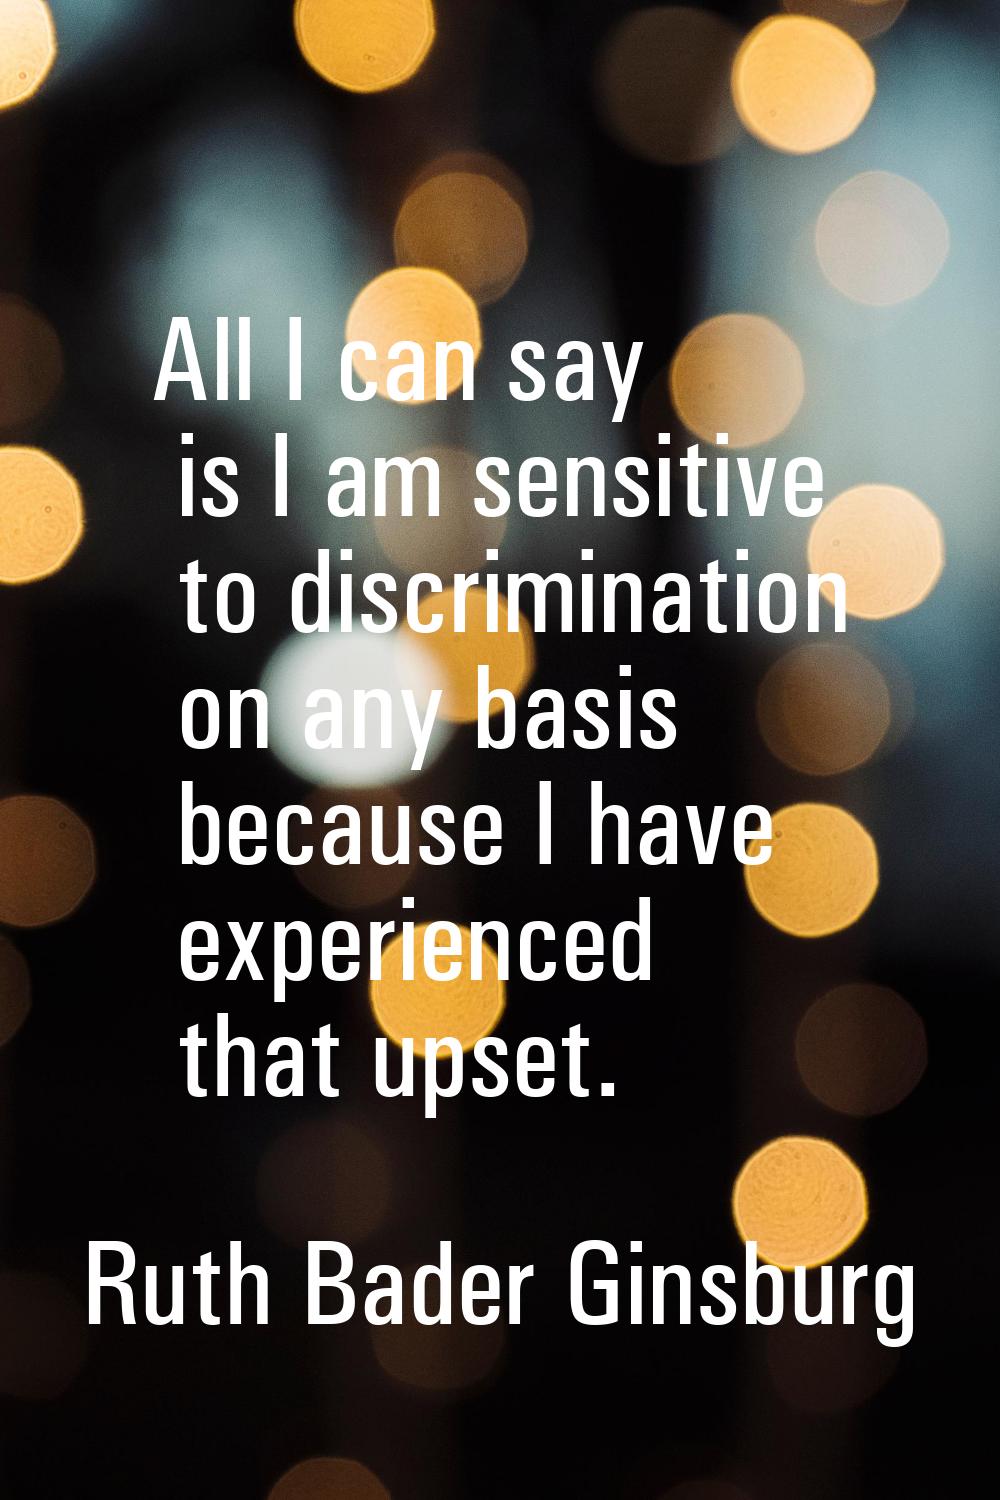 All I can say is I am sensitive to discrimination on any basis because I have experienced that upse